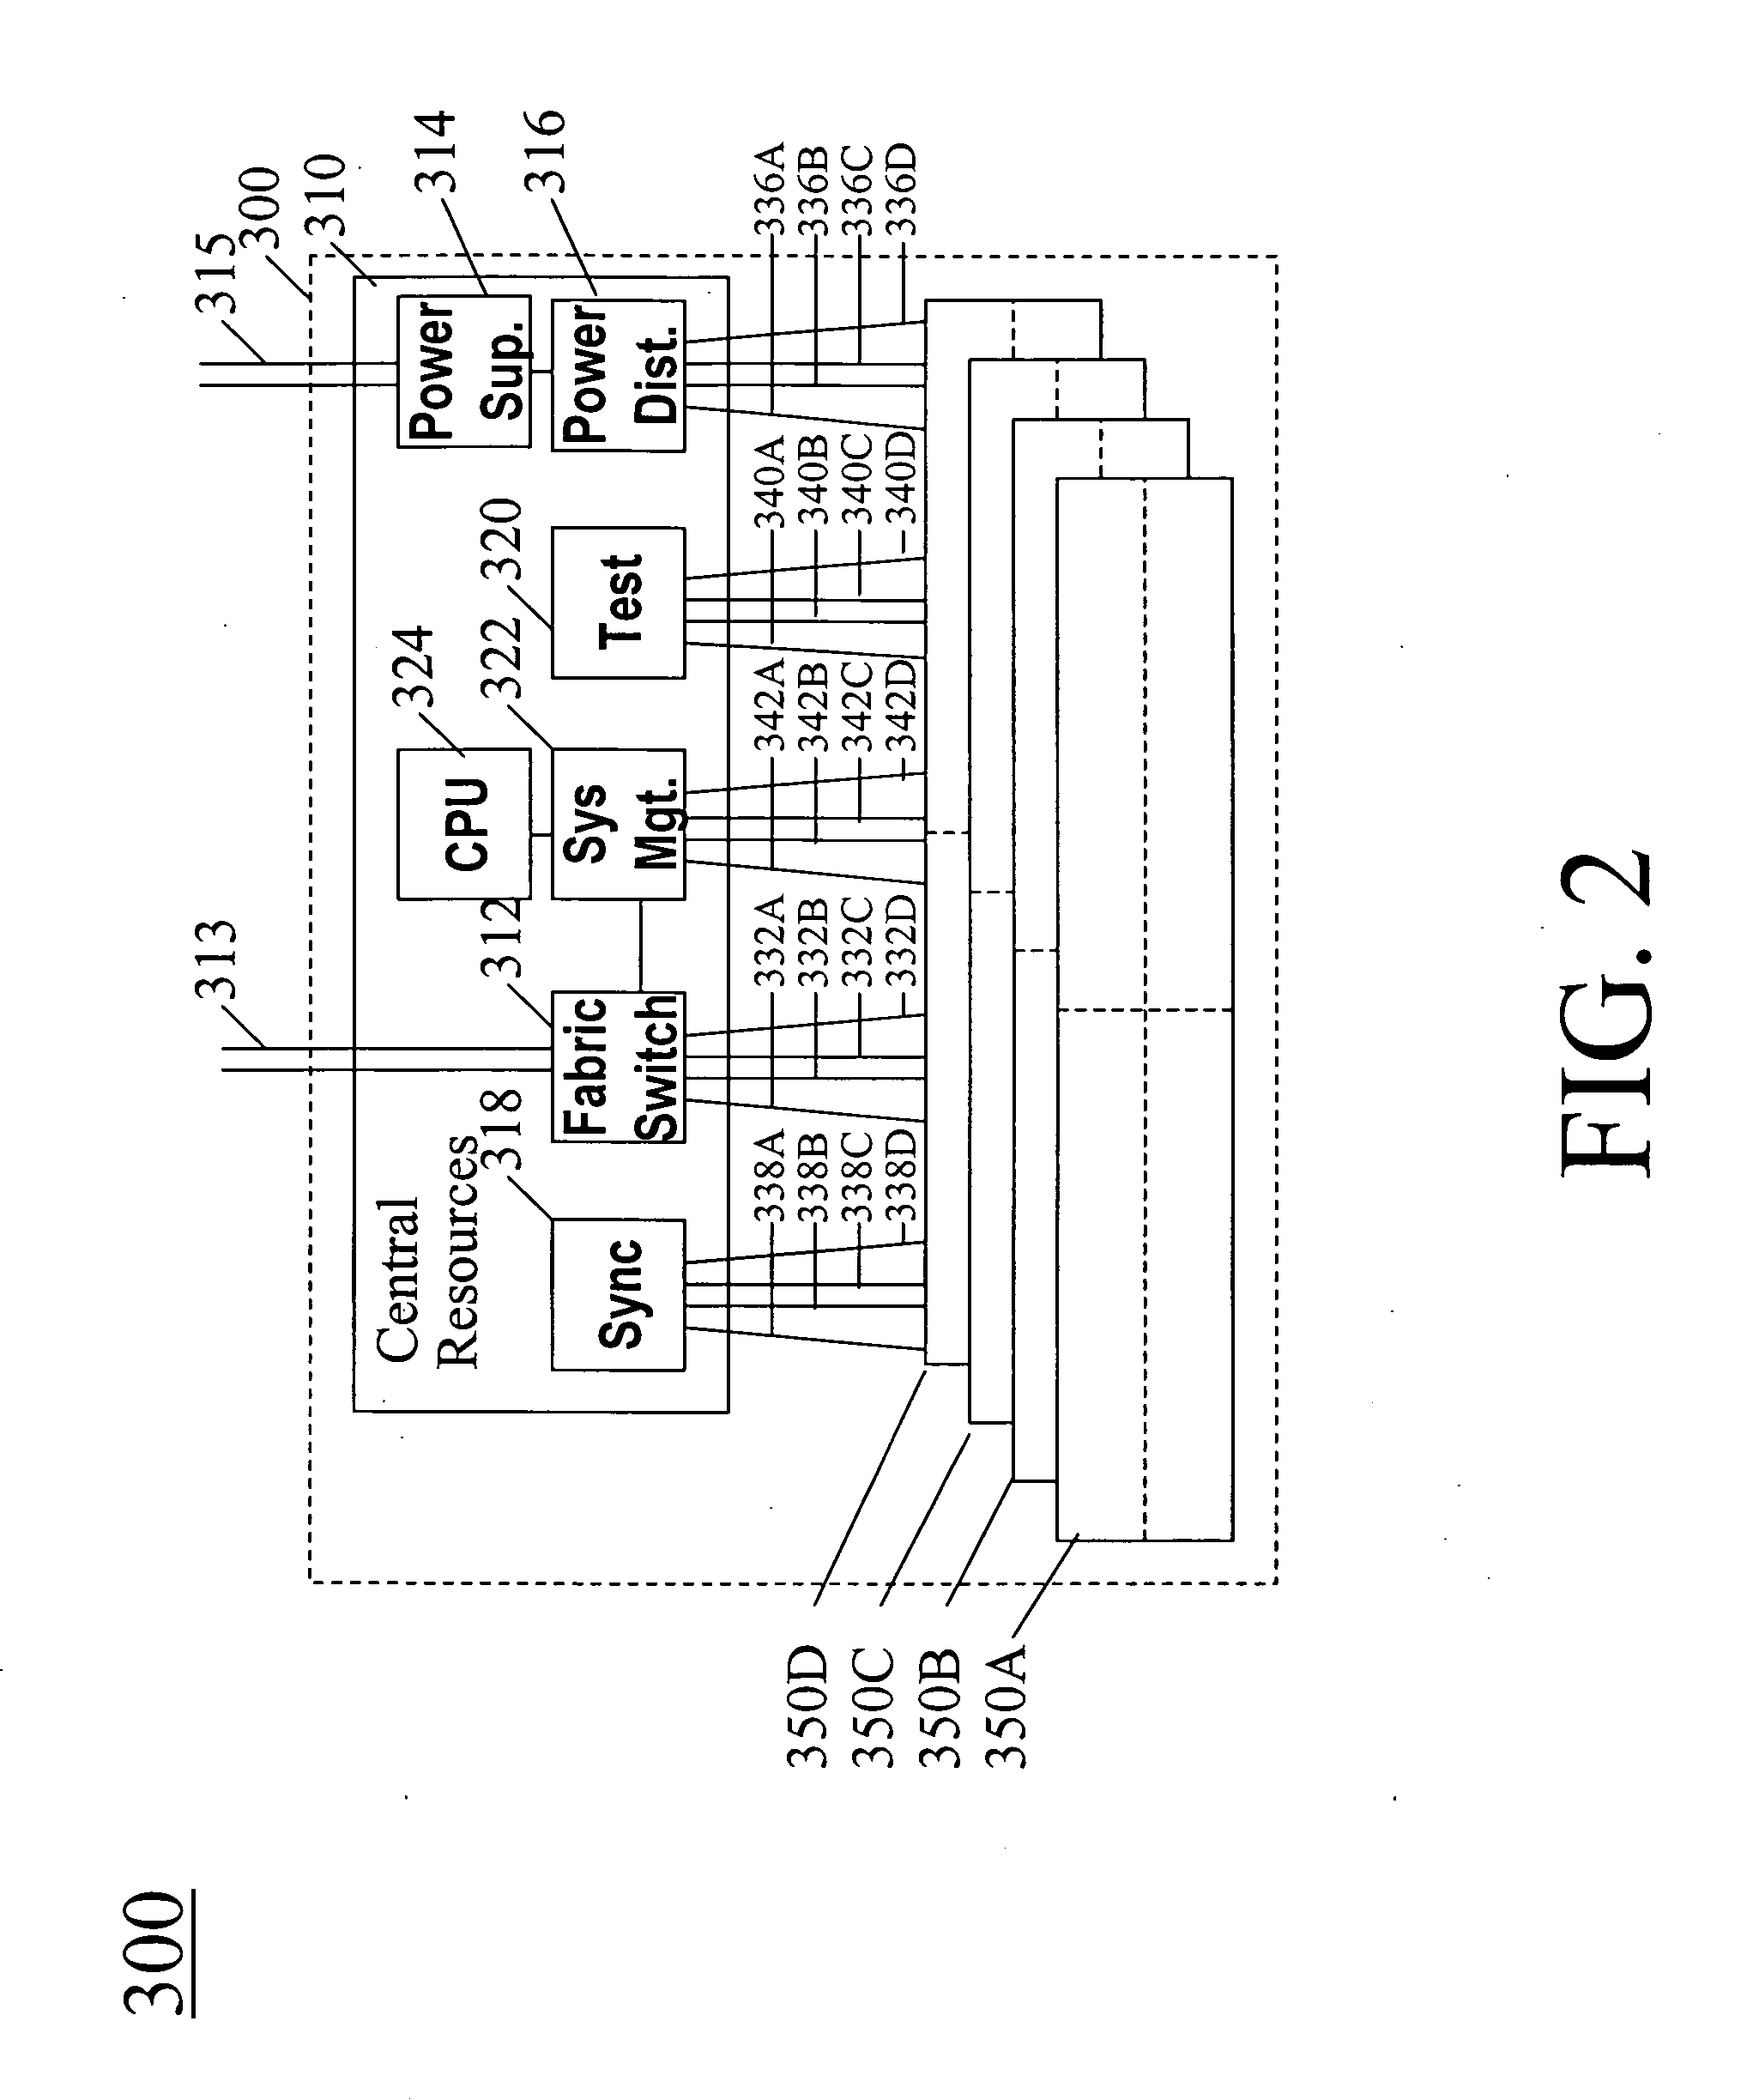 Hierarchical packaging for telecommunications and computing platforms